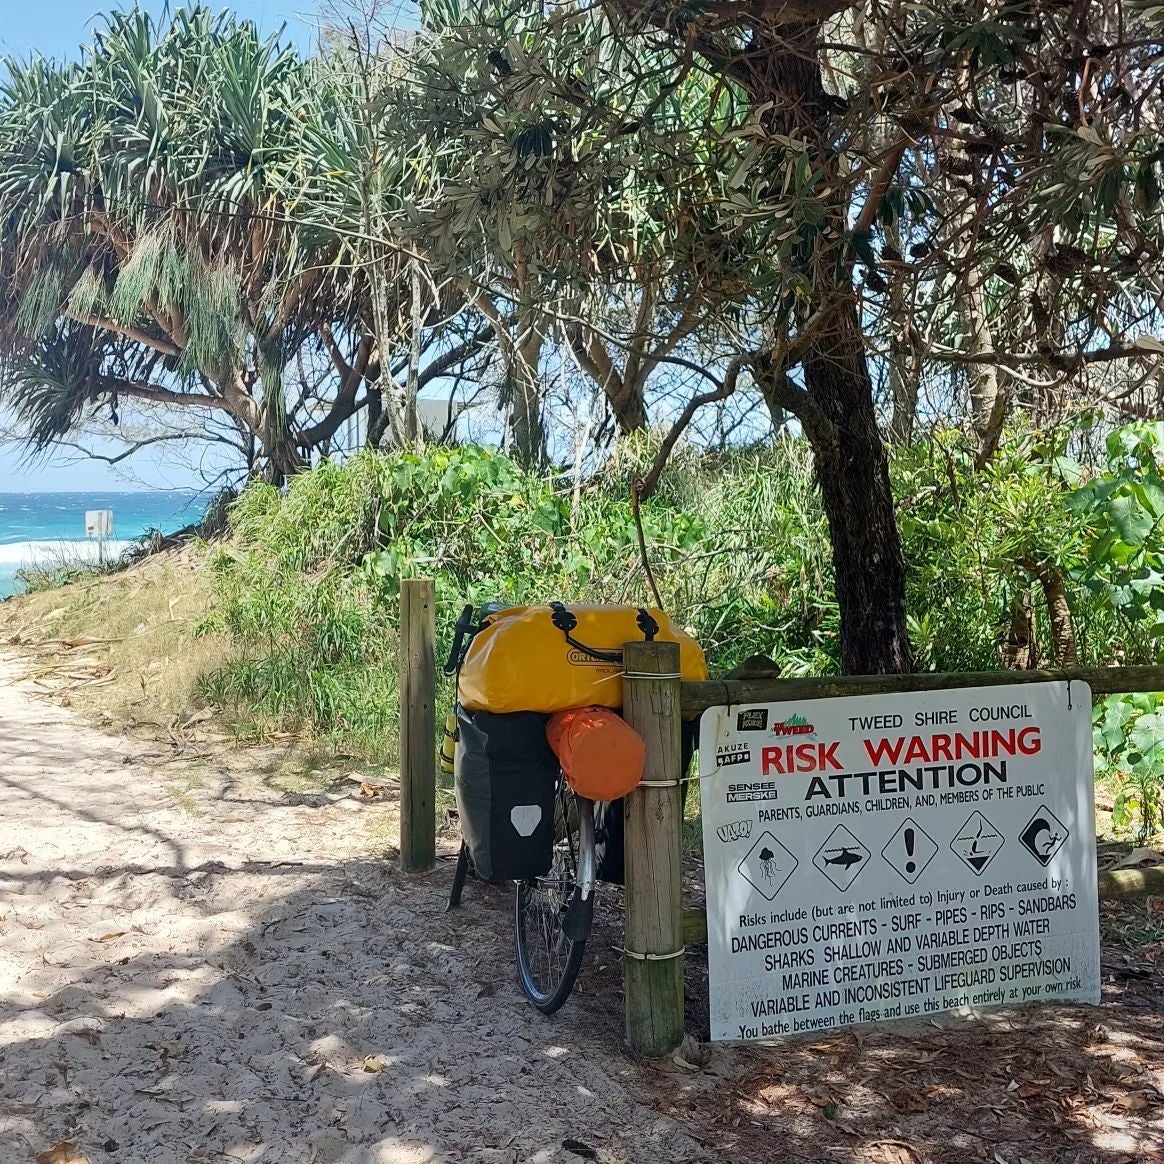 A bicycle with multiple bags attached to its back, resting under a sign that reads: "Risk Warning Attention. Parents, Guardians, Children and Member of the public. Dangerous Currents - Surf - Pipes - Rips - Sandbars - Sharks - Shallow and Variable Depth Water - Marine Creatures - Submerged Objects - Variable and Inconsistent Lifeguard Supervision. Your bathe between the flags and use this beach entirely at your own risk"